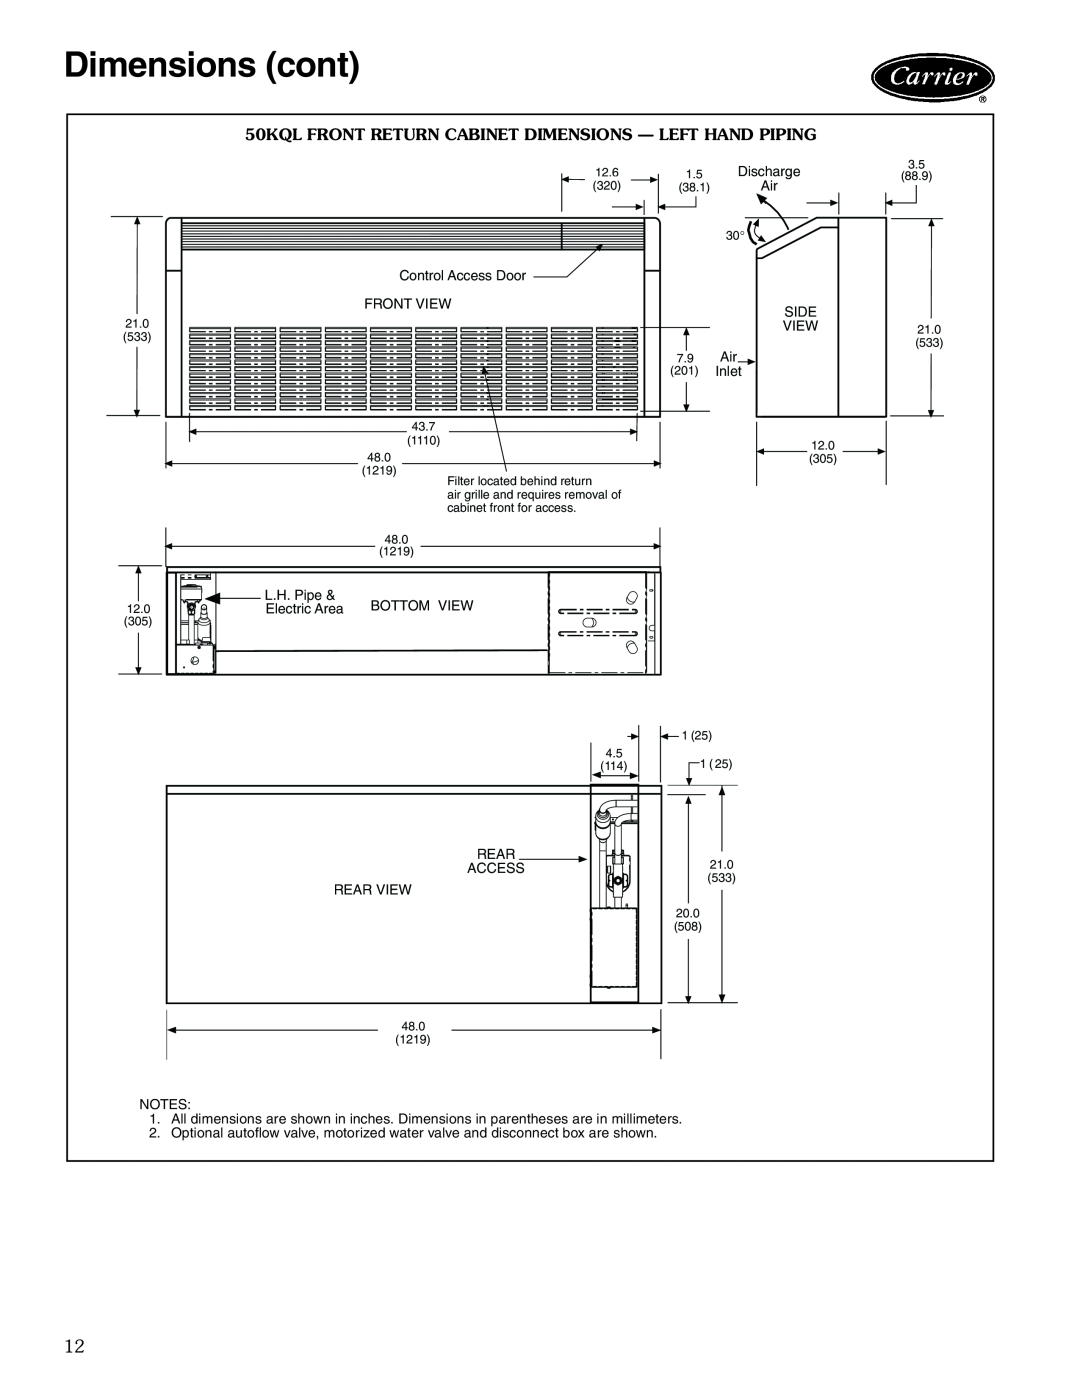 Carrier 50KQL-1PD manual Dimensions cont, 50KQL FRONT RETURN CABINET DIMENSIONS - LEFT HAND PIPING 